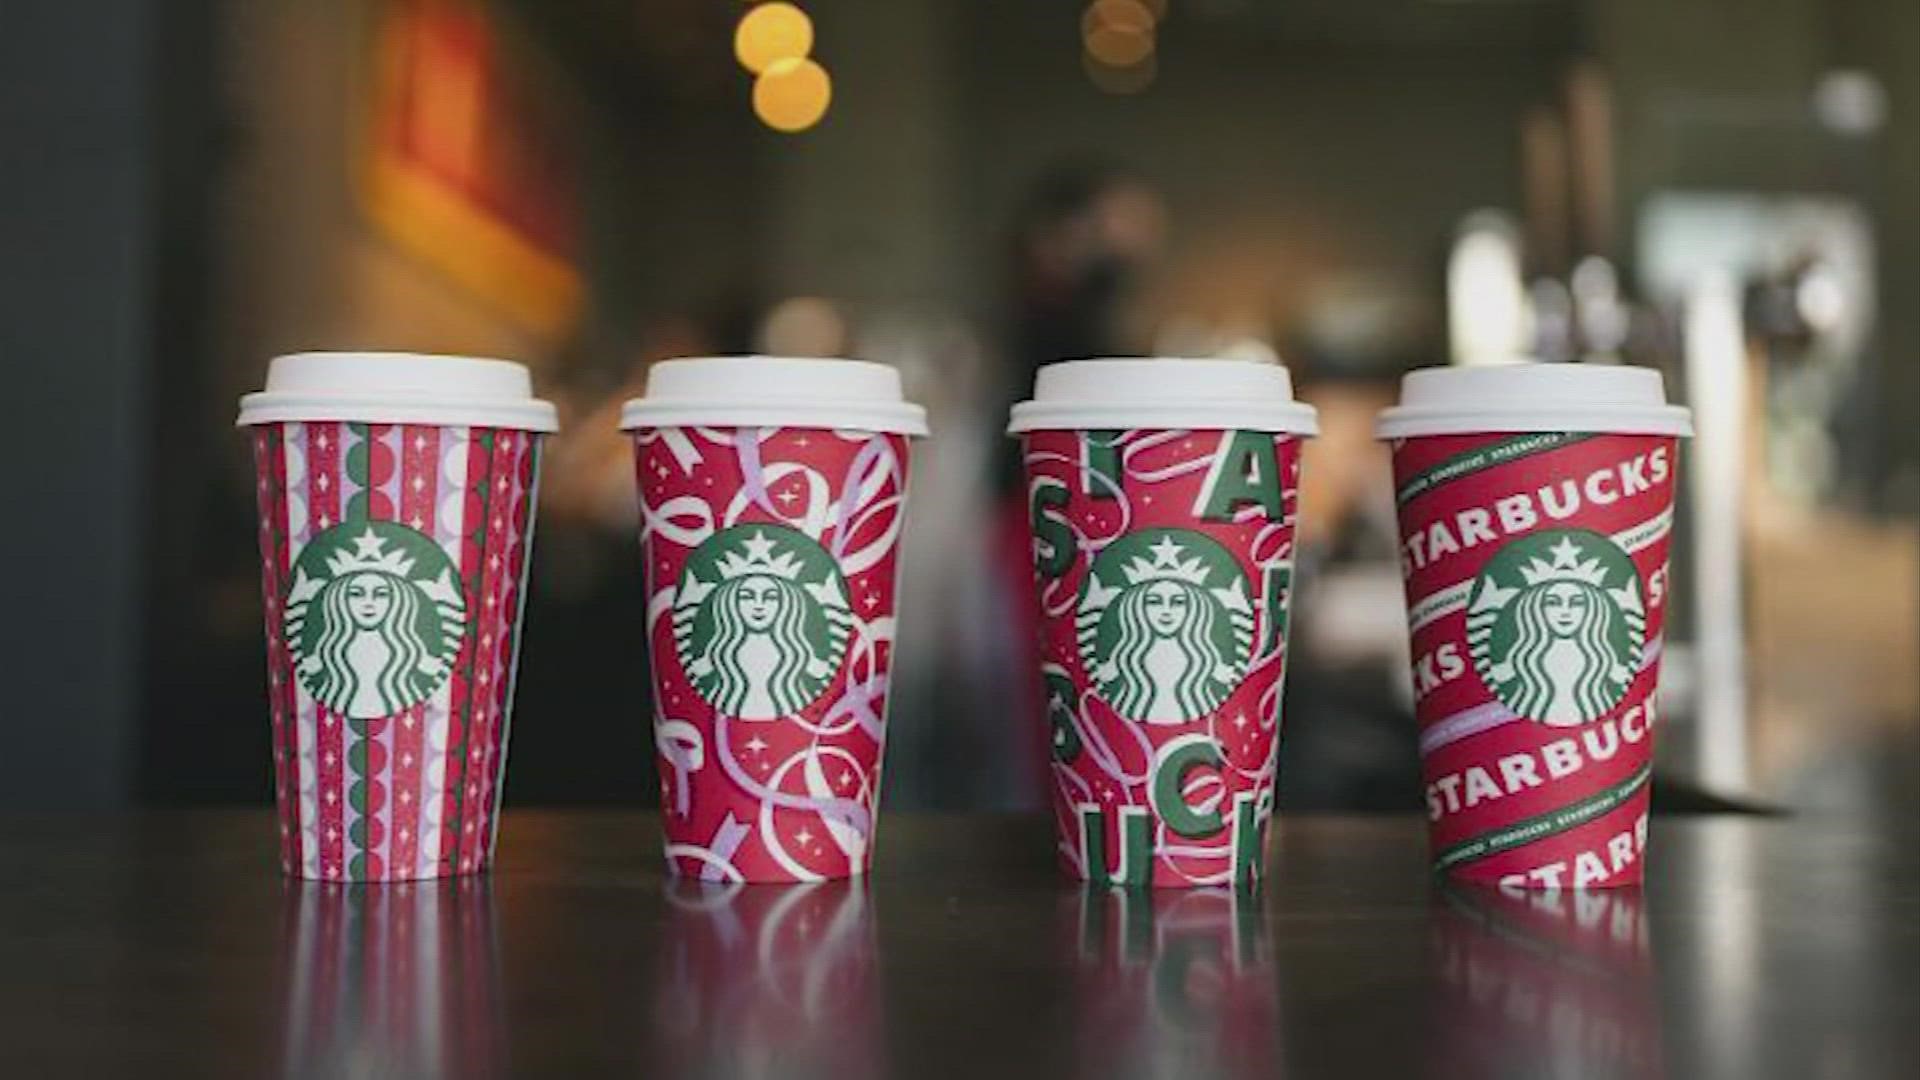 The company announced Wednesday the return of its holiday drinks, food and cups coming this week.